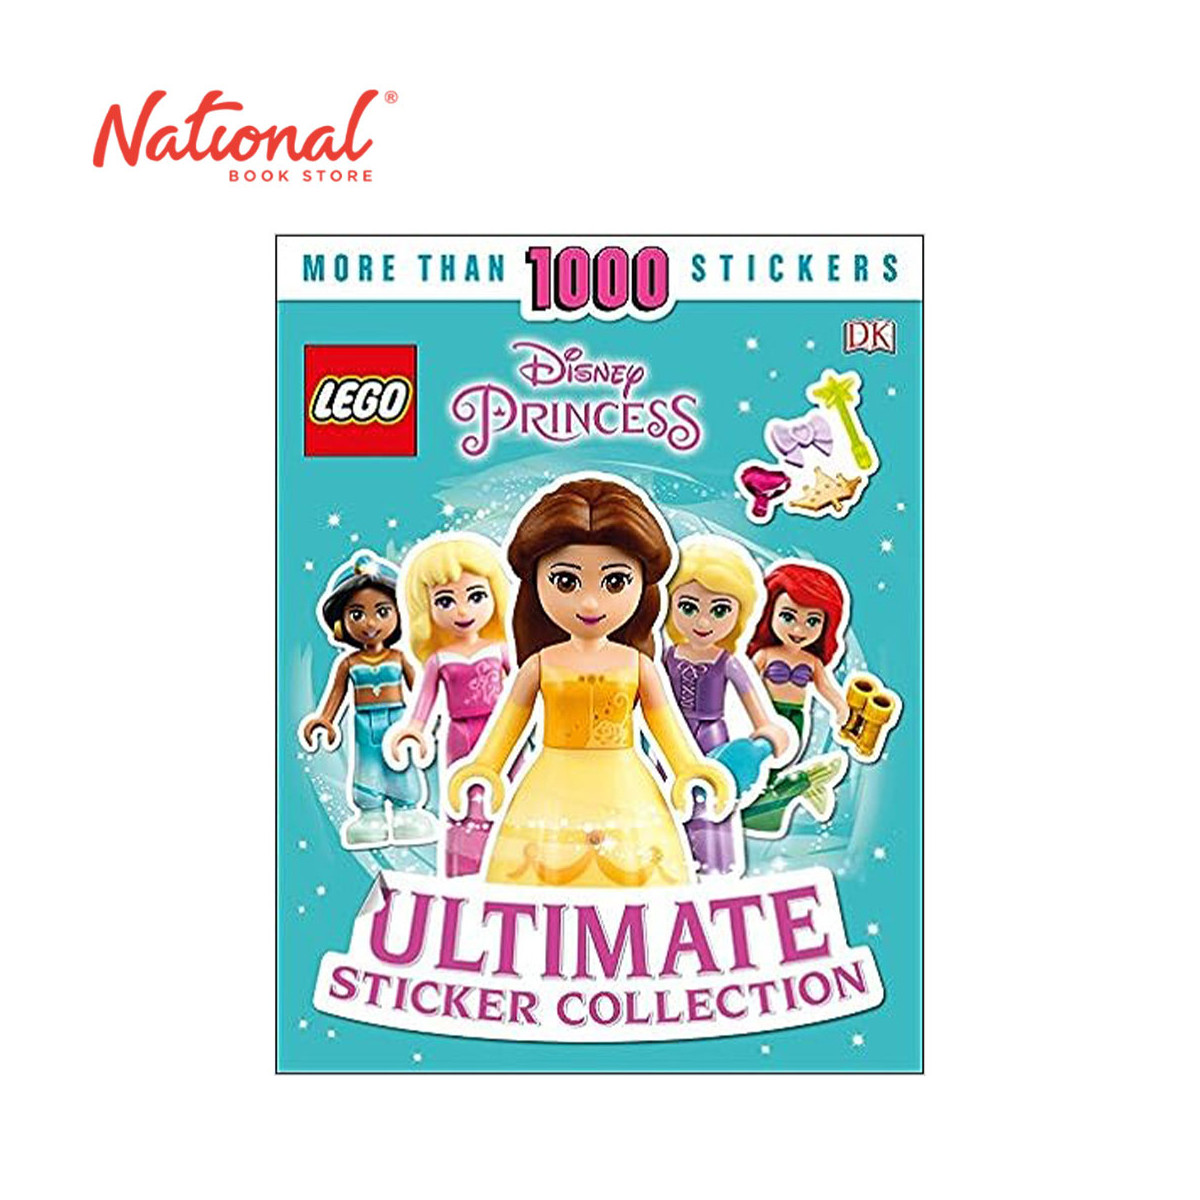 Ultimate Sticker Collection Lego Disney Princess By DK - Trade Paperback - Books for Kids - Hobbies